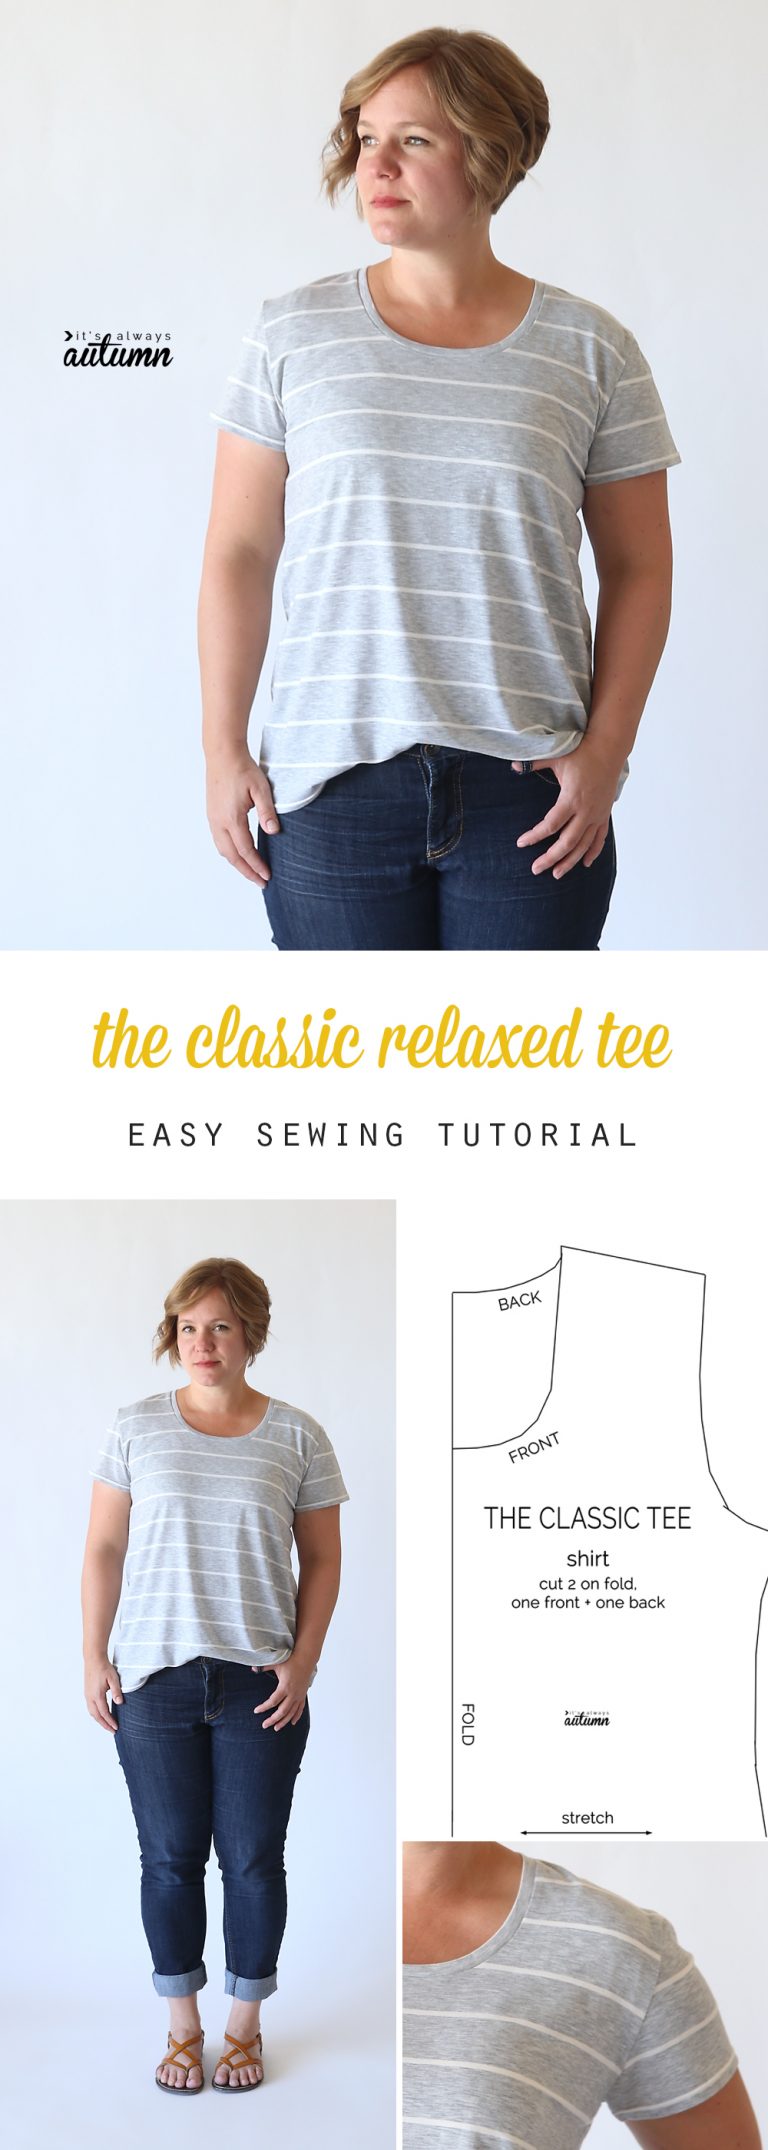 the classic tee in a relaxed fit | easy sewing tutorial - It's Always ...